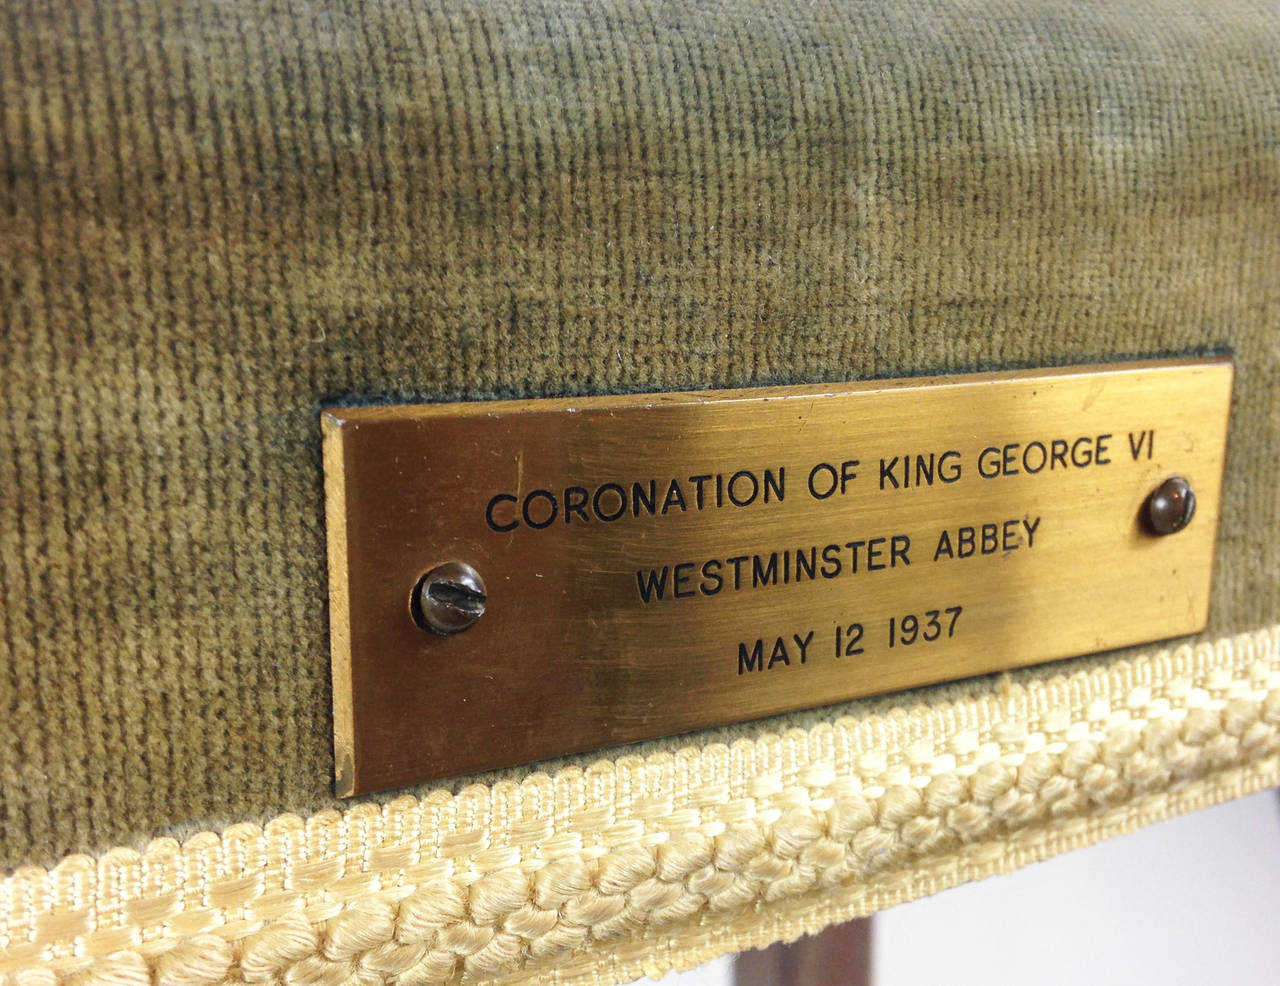 An original and unrestored example of an oak Coronation stool made for and used at the Coronation of George VI at Westminster Abbey in 1937.

The stool still has its original green upholstered top - albeit faded with some light staining. The lace